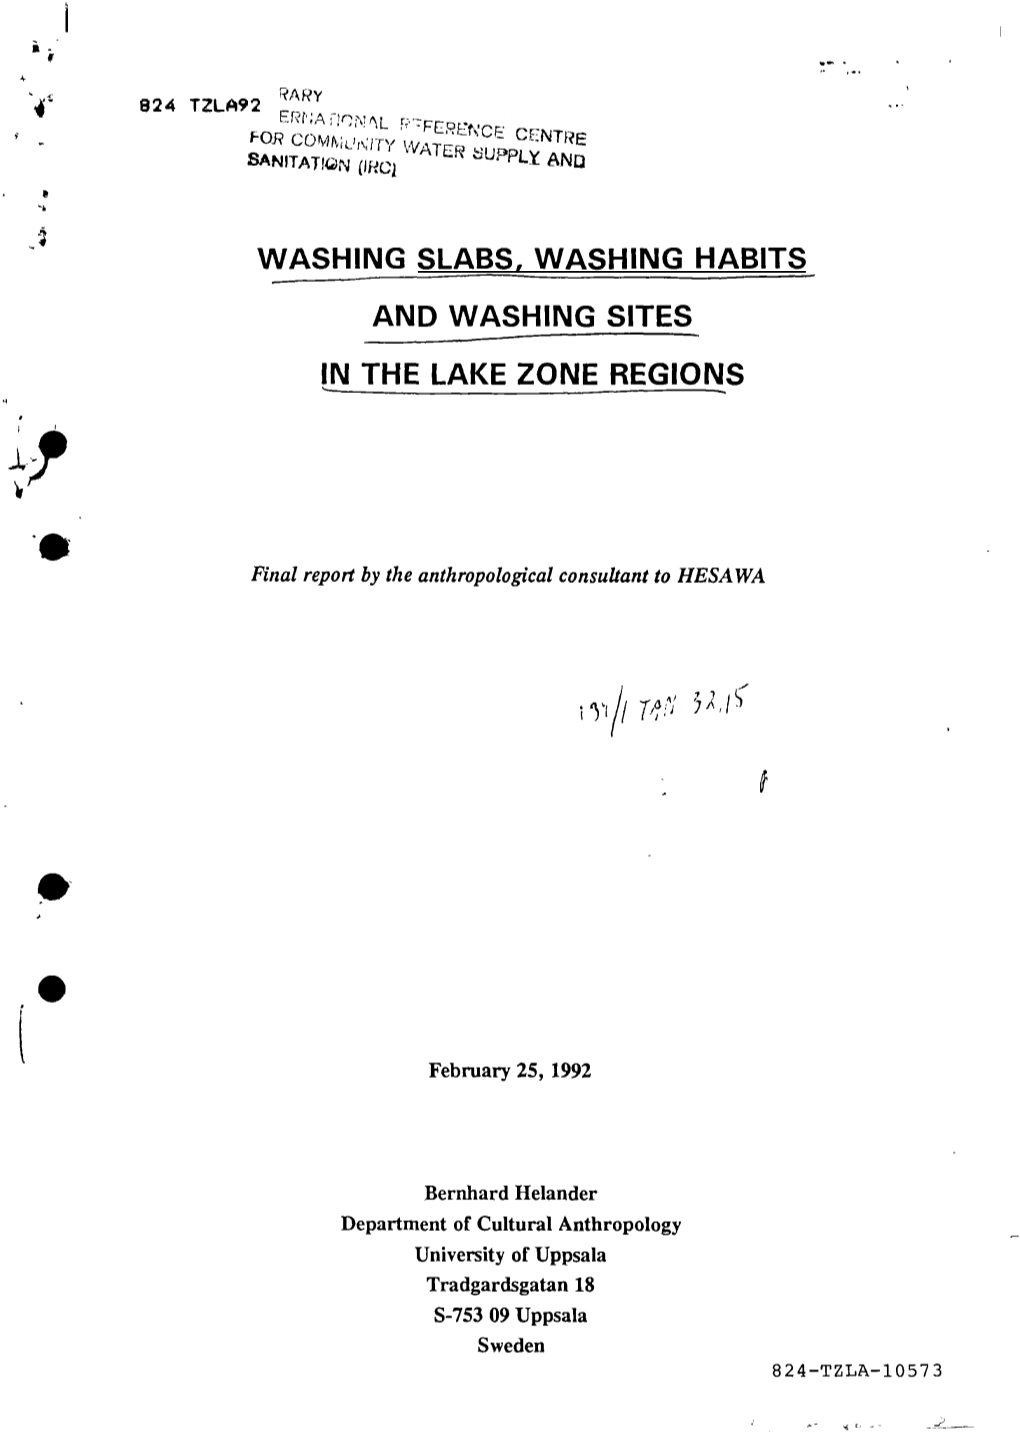 Wasi-Hng Slabs, Washing Habits and Washing Sites in the Lake Zone Regions